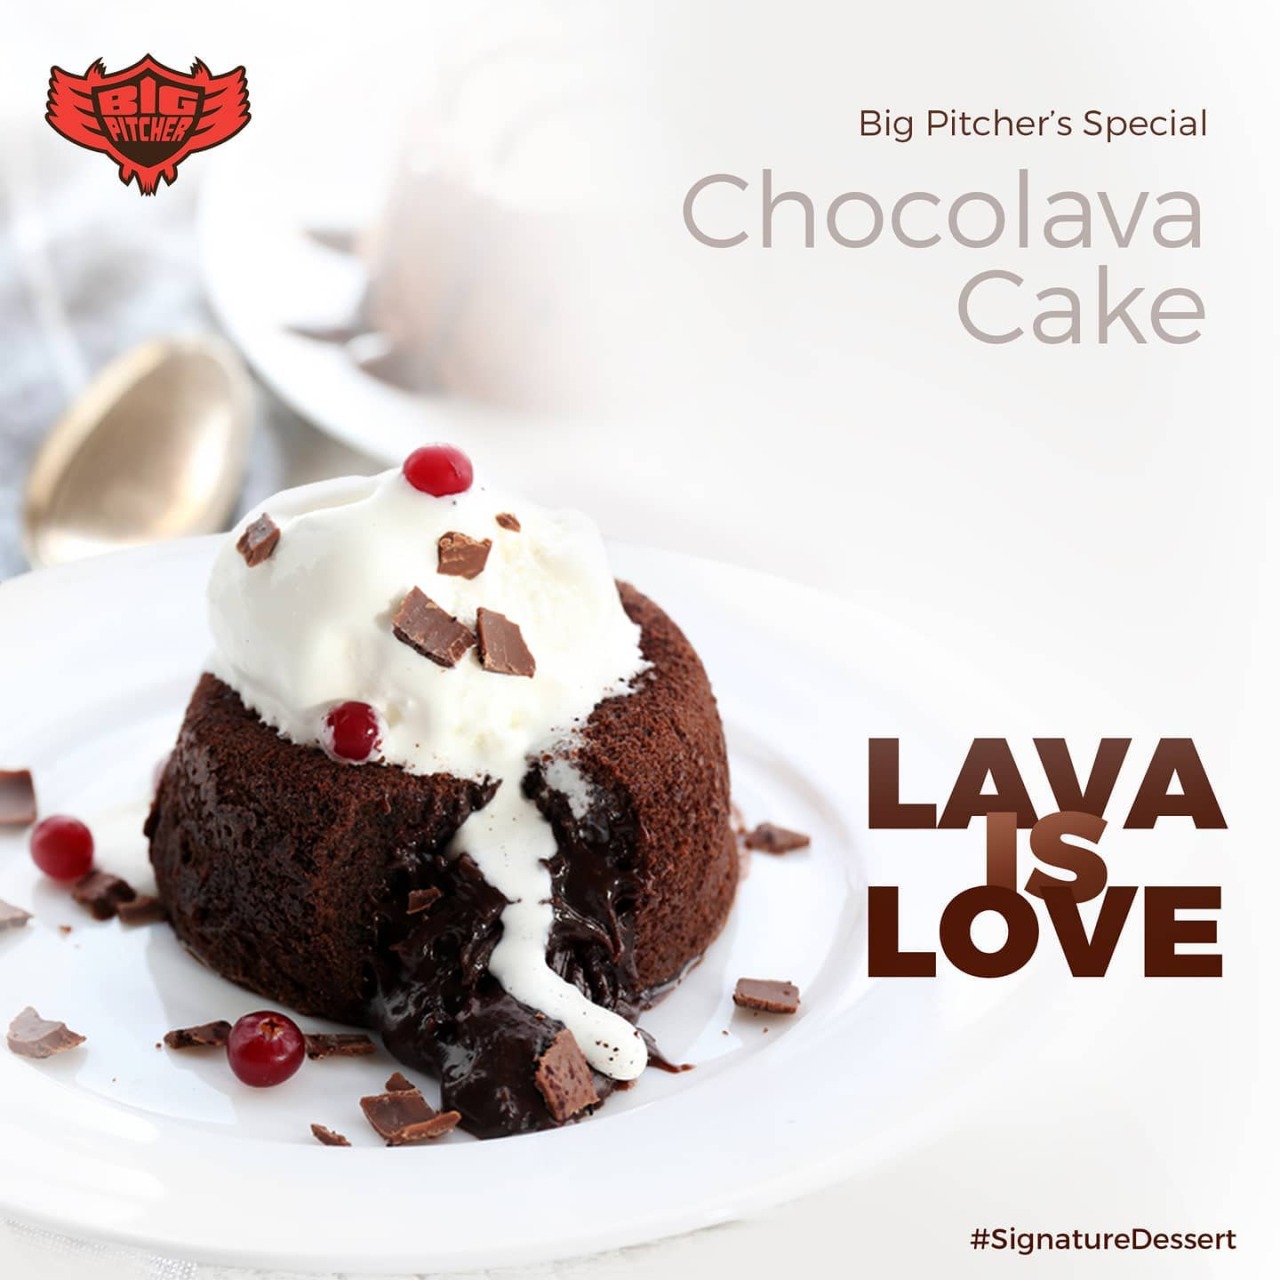 The Mountain of happiness filled with the yummiest Chocolate is now available at Big Pitcher. Beware of the addictive choco that oozes out upon Scooping.  Dare Scoop it?? . . . . #chocolavacake #chocolava #chocolavacakes #desserts #dessertsofinstagram #dessertporn #vanilla #sweettooth #sweets #yummy😋😋 #chocolates #bestdessert #dessertgram #dessertrecipe #dessertparty #addictive #bangalorefoodblogger #bangalore_insta #happiness💕 #chocolatecake #bangaloredestinations #bangalorean #Bigpitcher #bigpitcherthings #sarjapura #bangalore_insta #bangalore — view on Instagram https://ift.tt/2O9Zqmv #Instagram#IFTTT